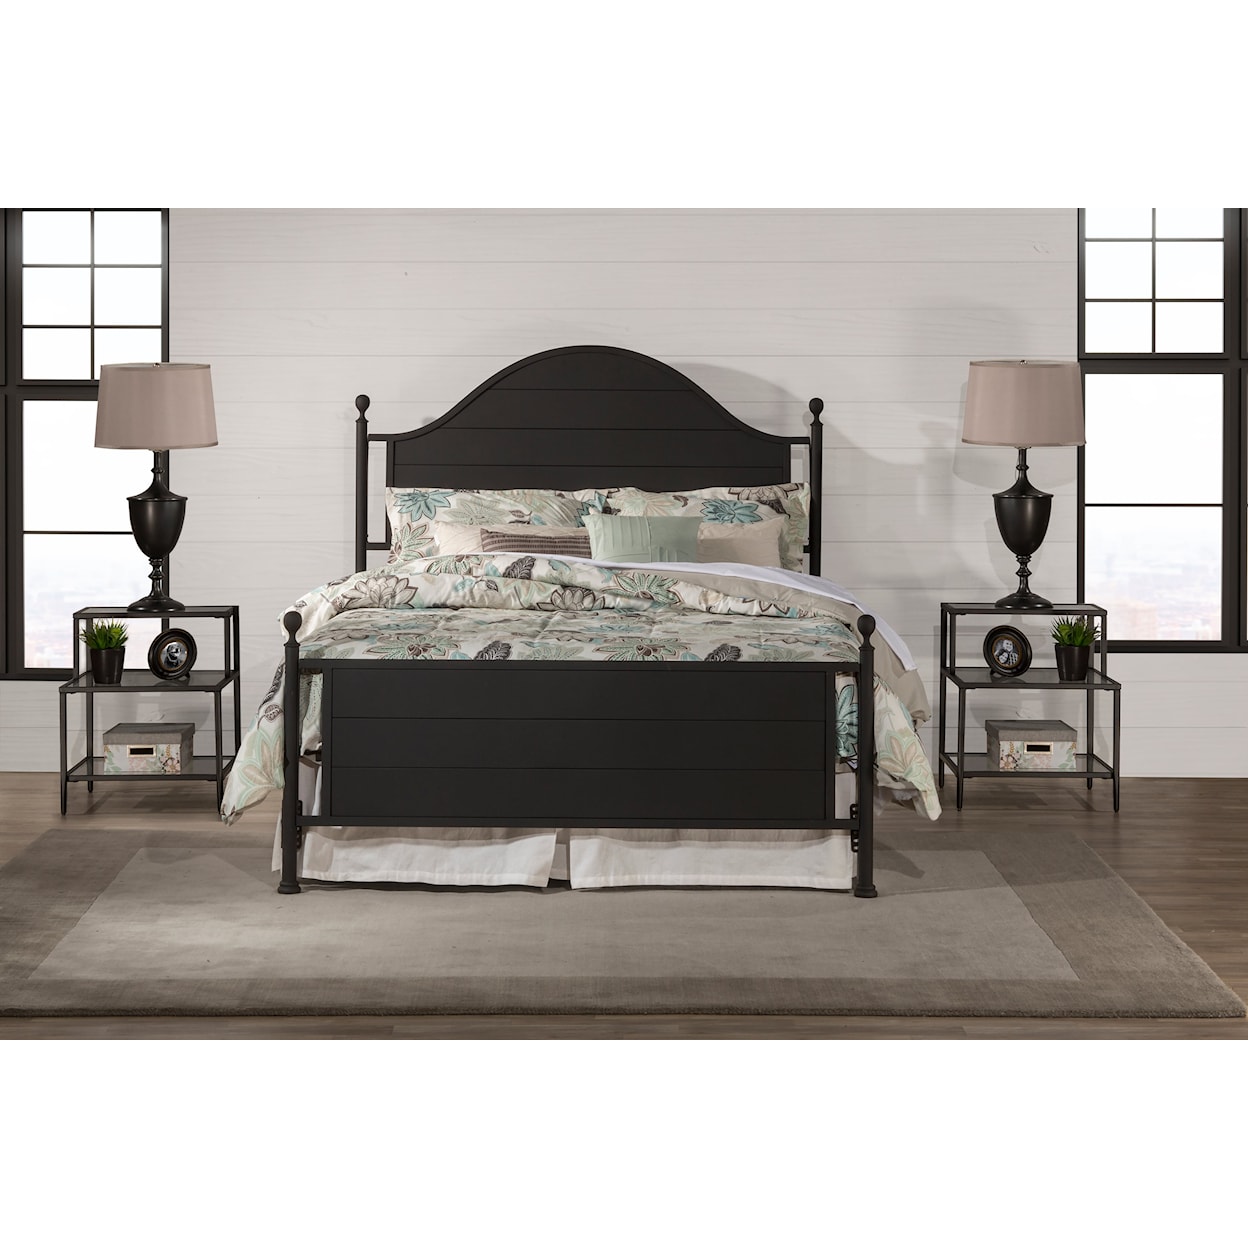 Hillsdale Cumberland King Bed